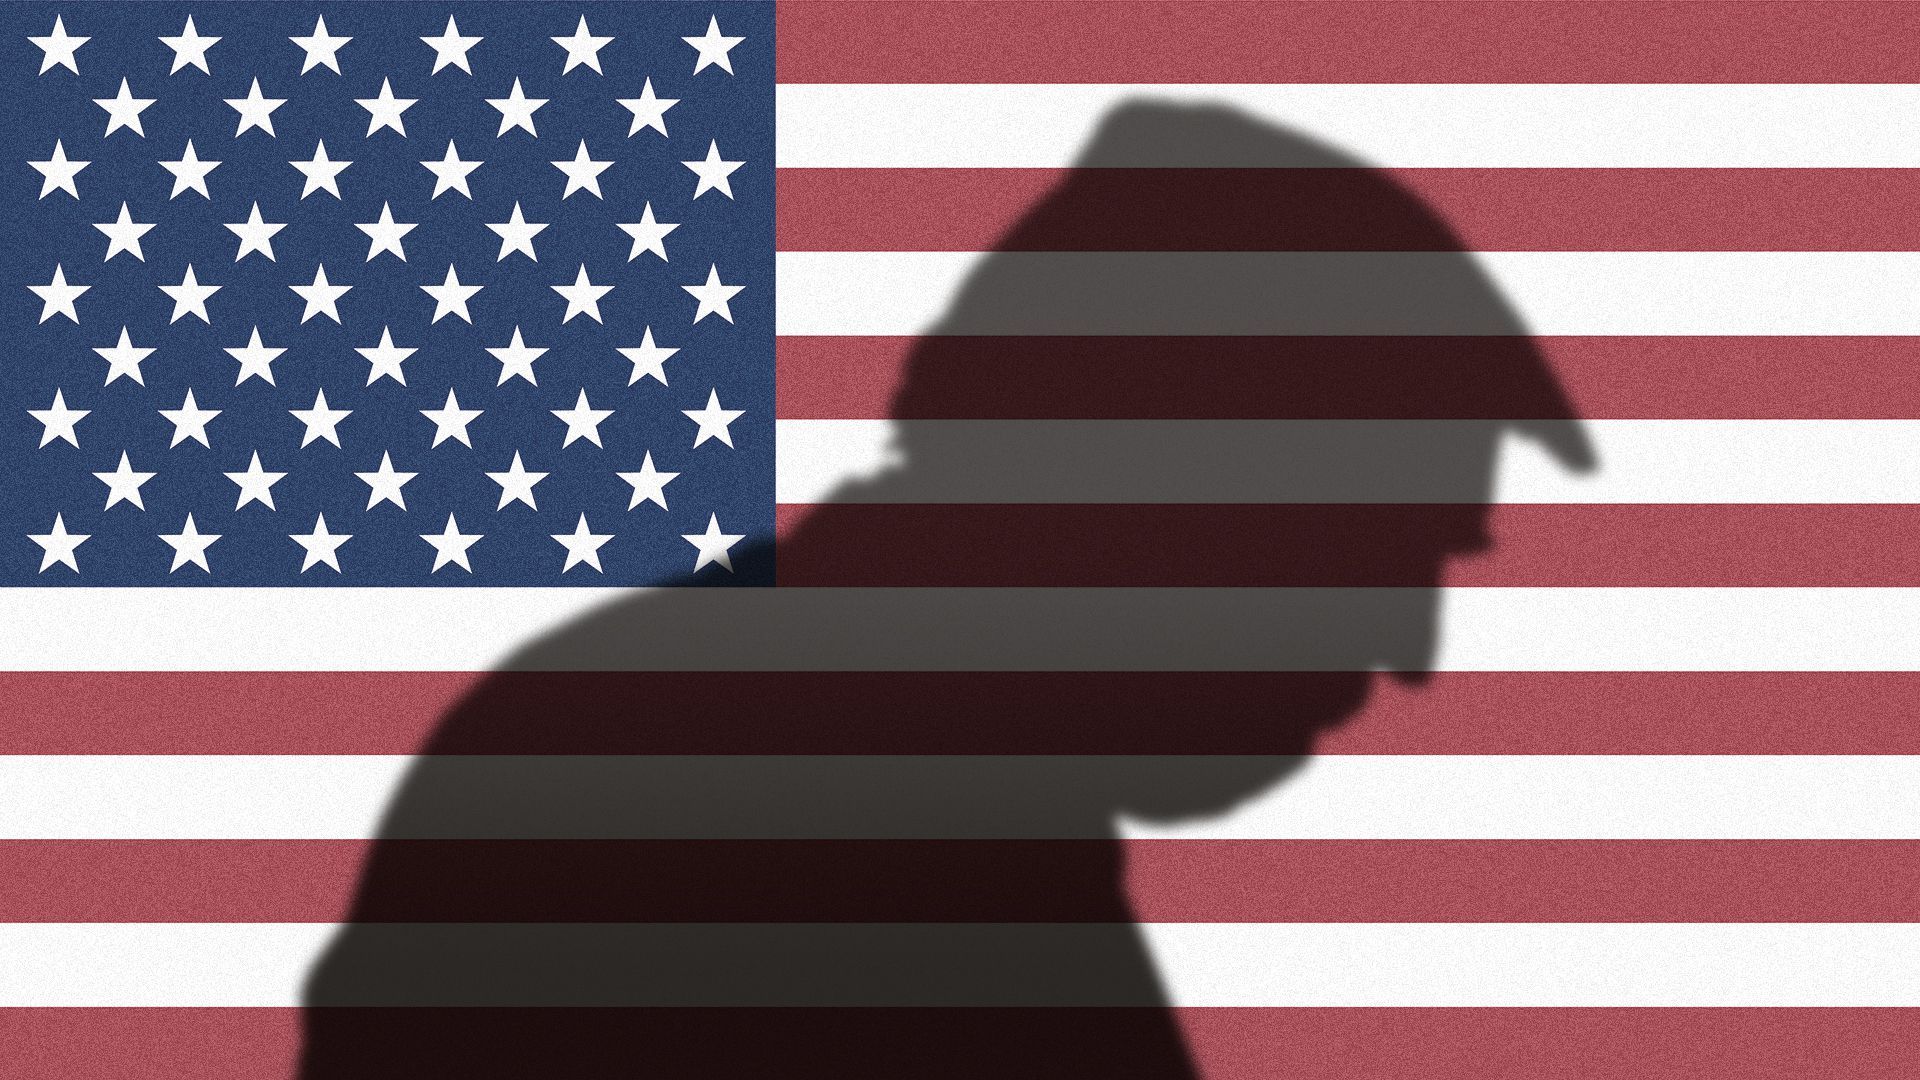 Illustration of Trump's shadow cast upon the U.S. flag